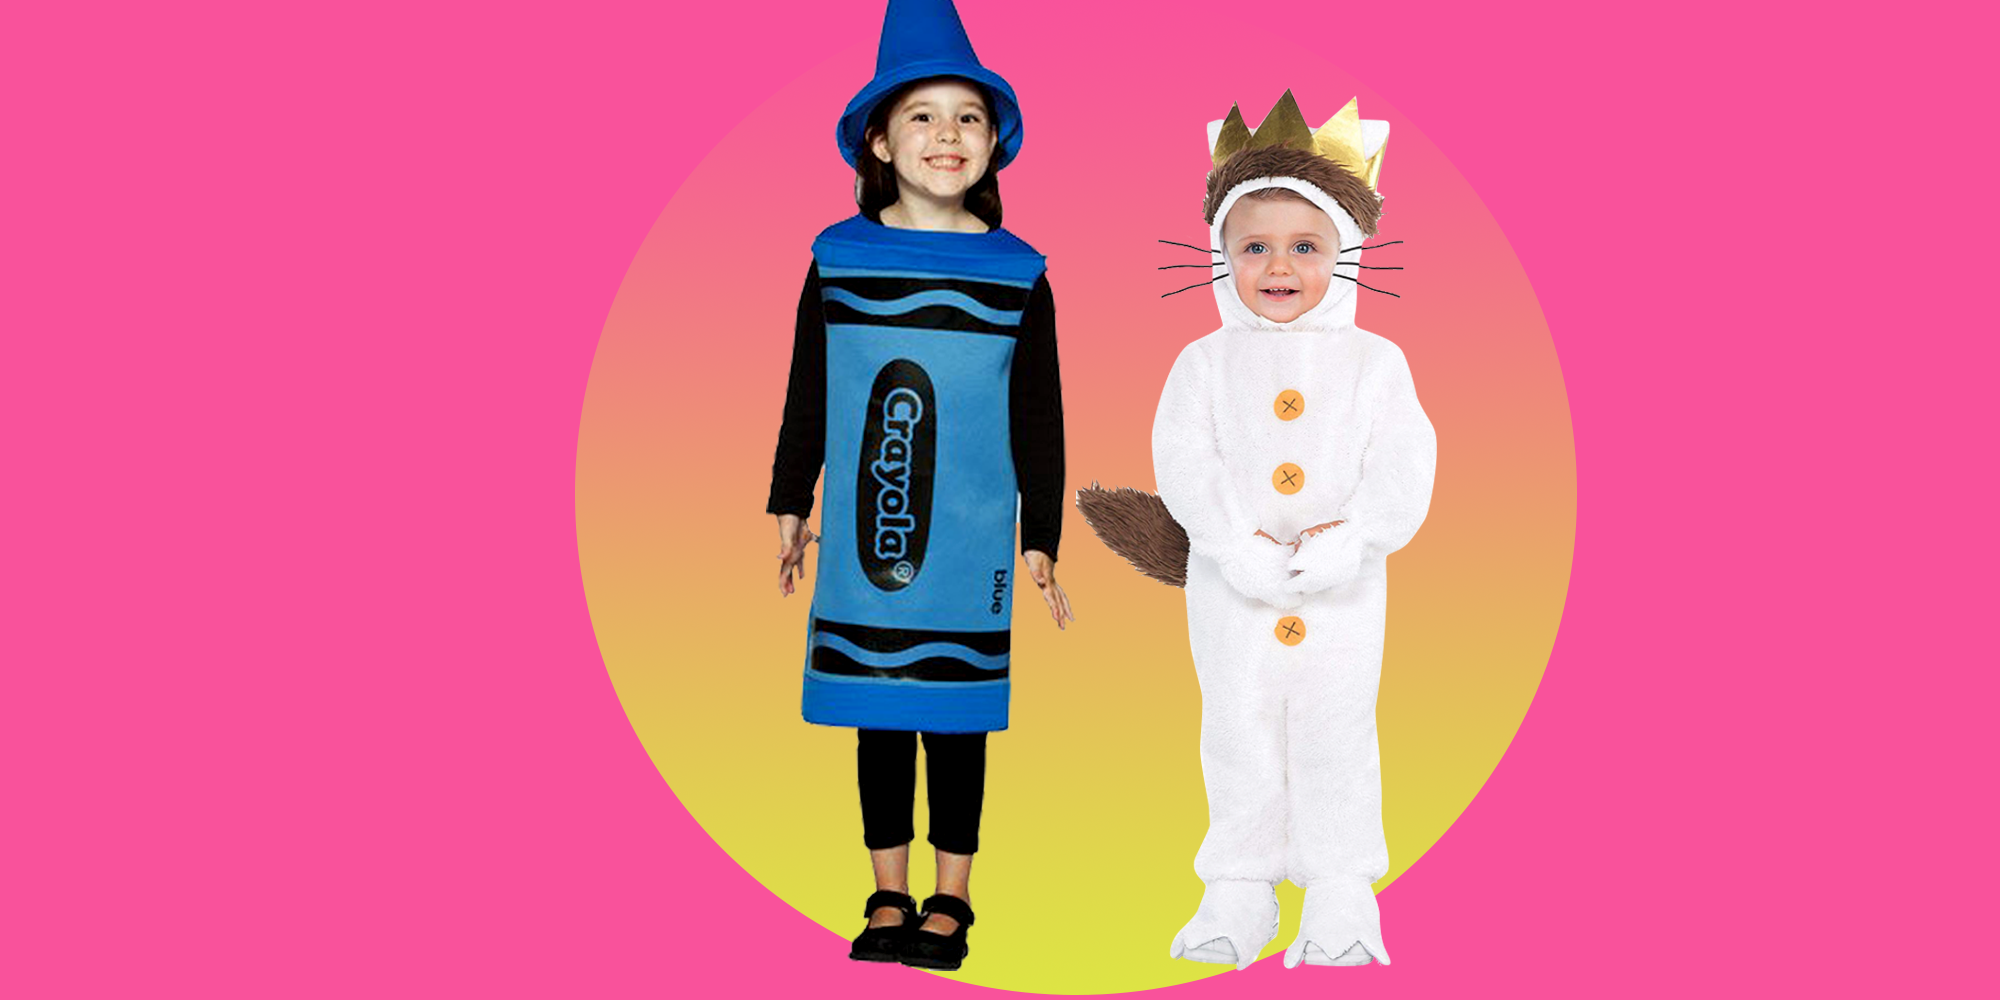 Save Time and Money (9 Awesome DIY Book Character Costumes +41 Ideas )